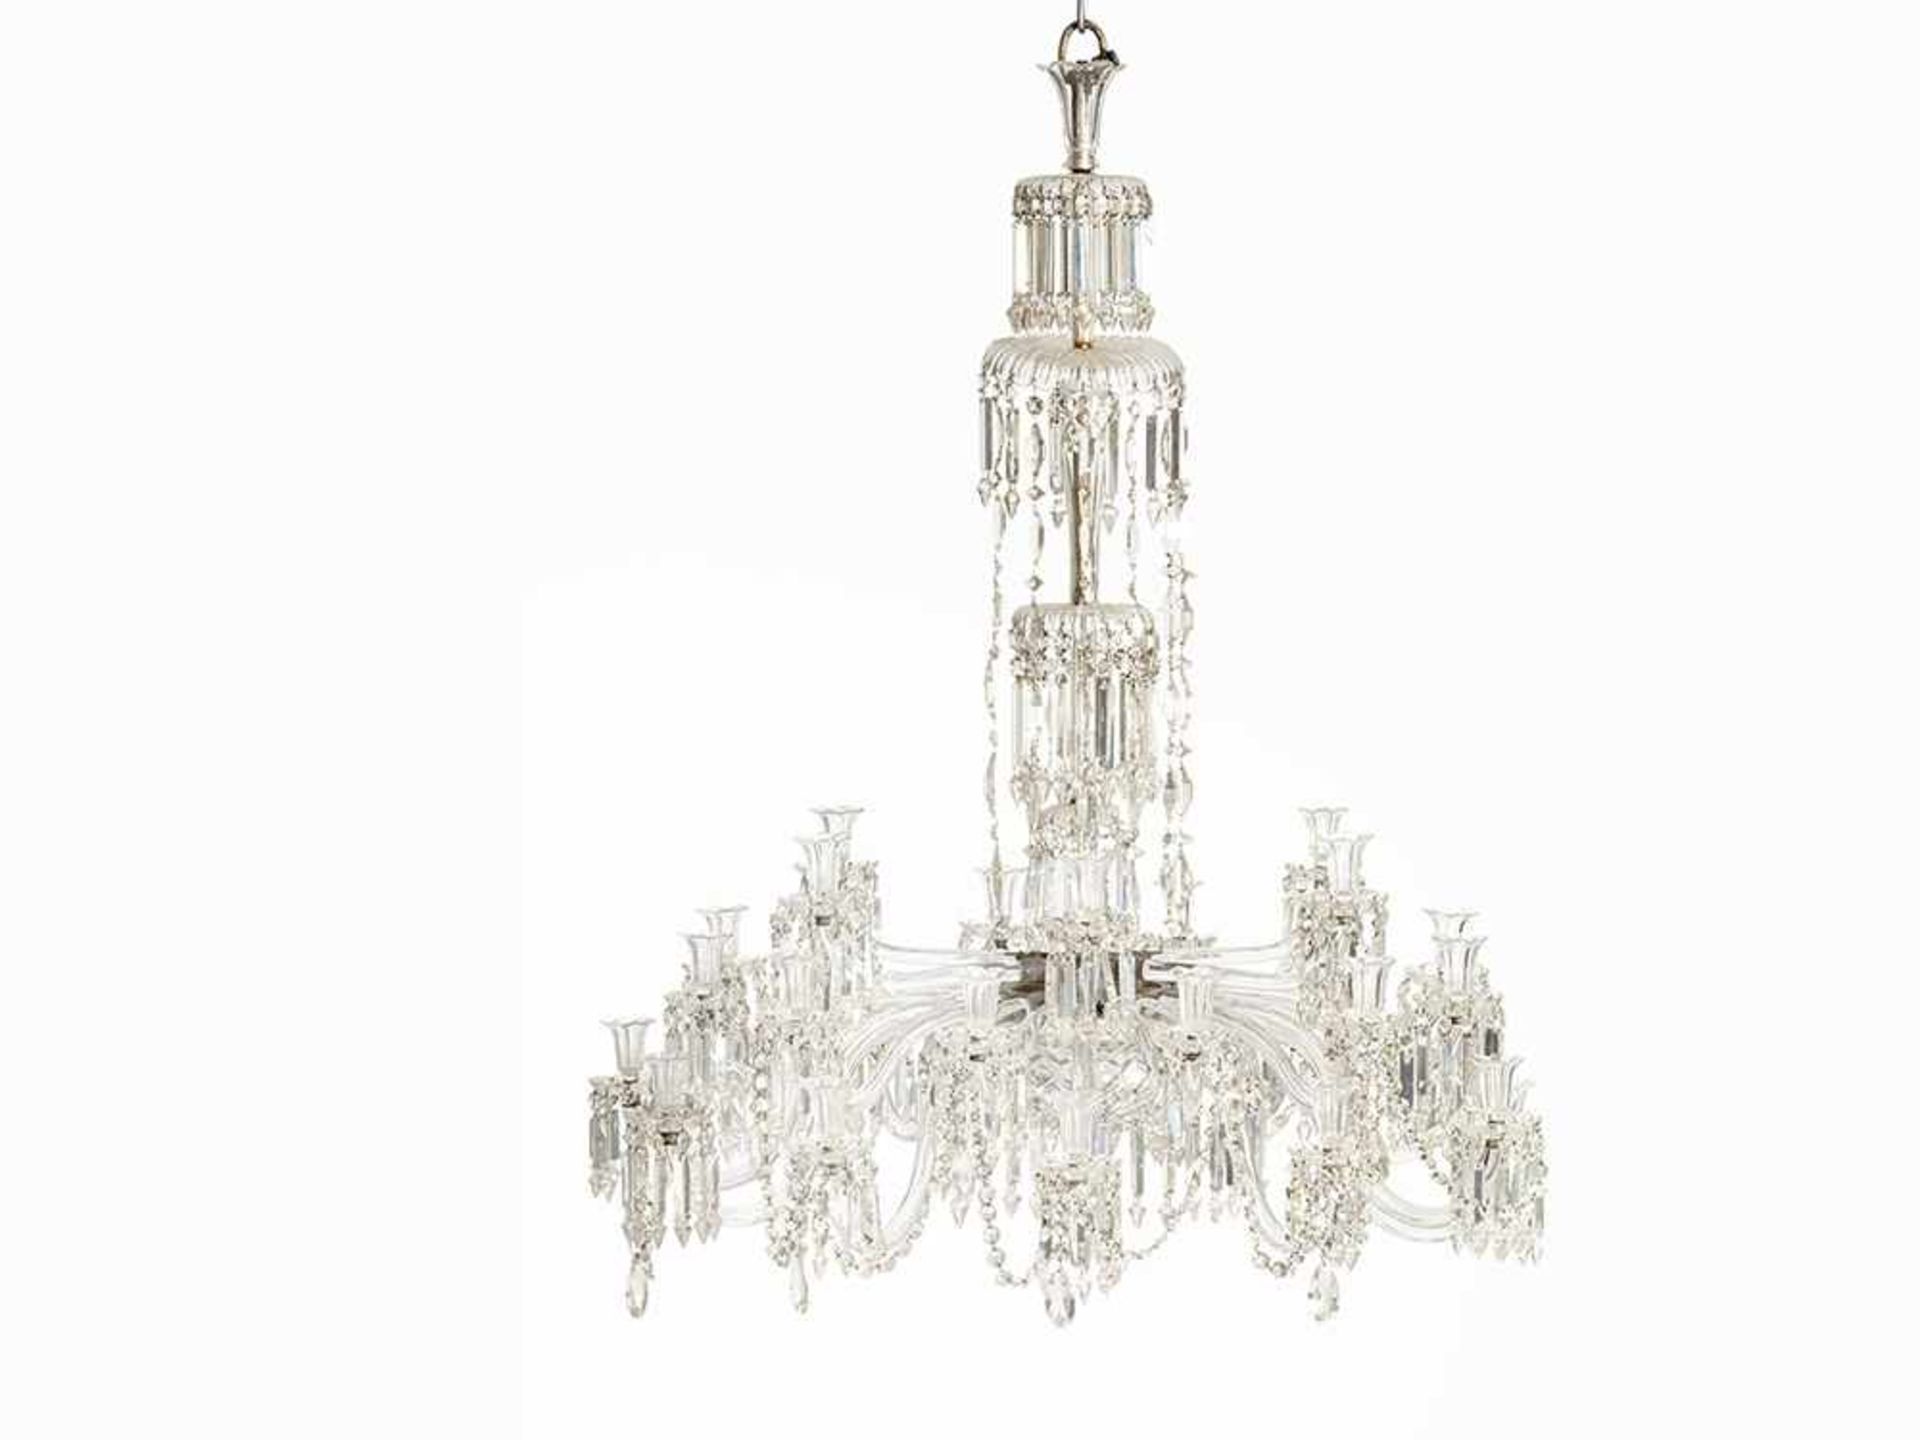 Magnificent Baccarat Chandelier, France, 19th C. Baccarat crystal France, 19th century 30 electric